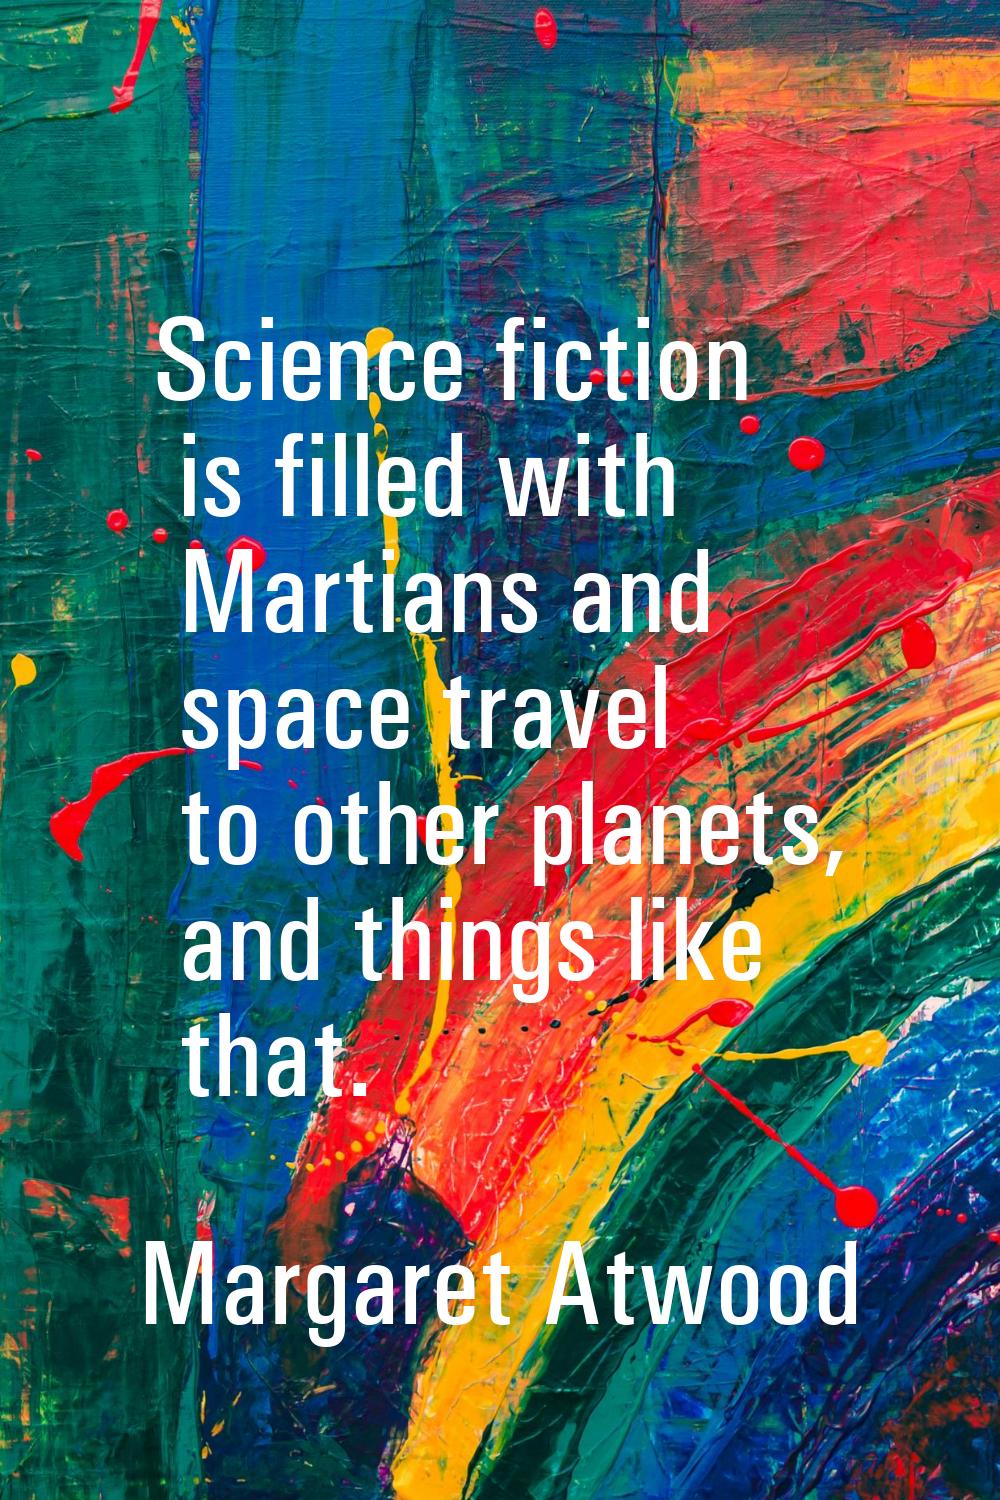 Science fiction is filled with Martians and space travel to other planets, and things like that.